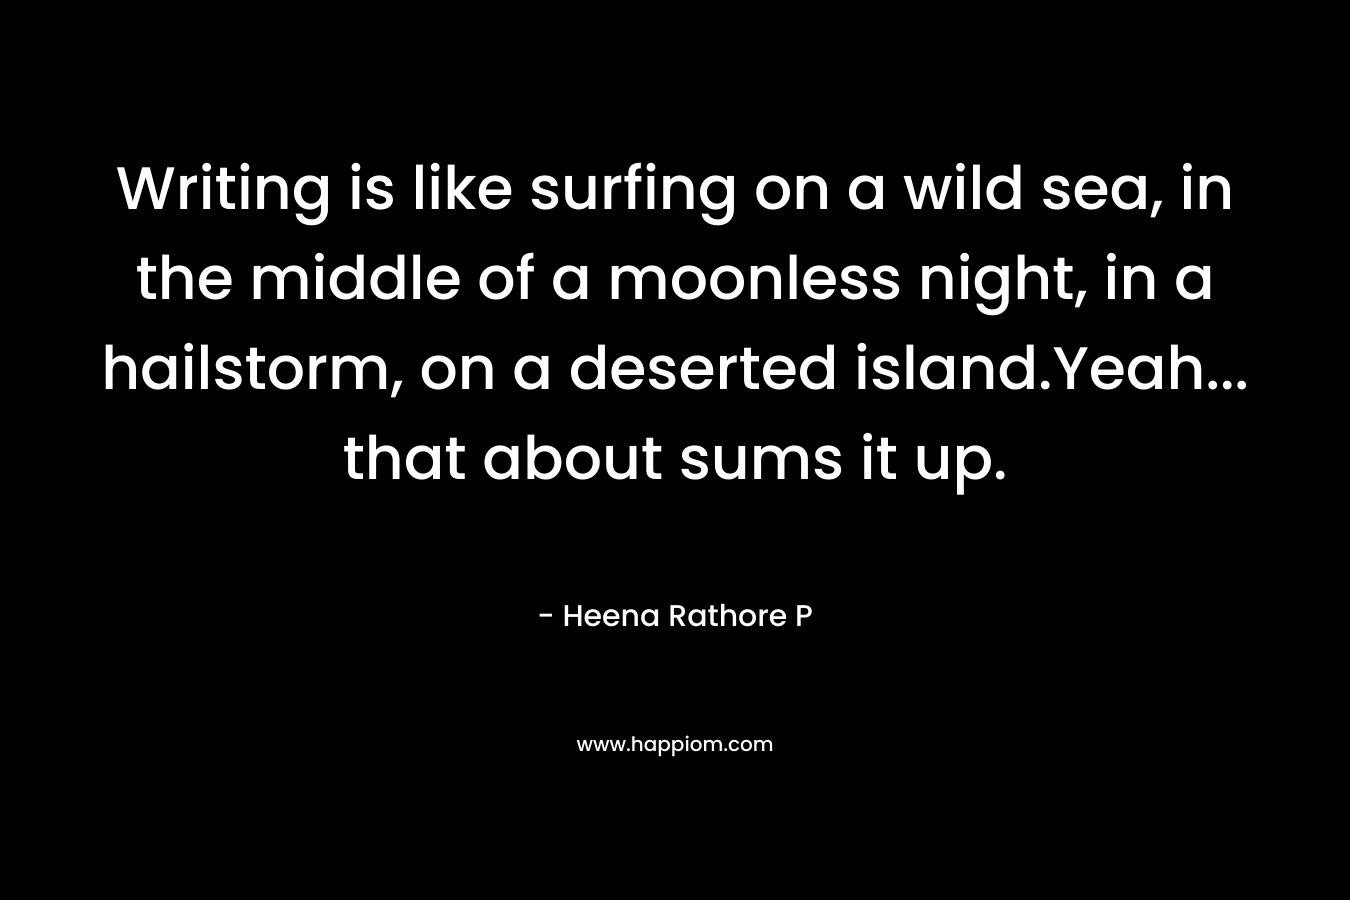 Writing is like surfing on a wild sea, in the middle of a moonless night, in a hailstorm, on a deserted island.Yeah... that about sums it up.